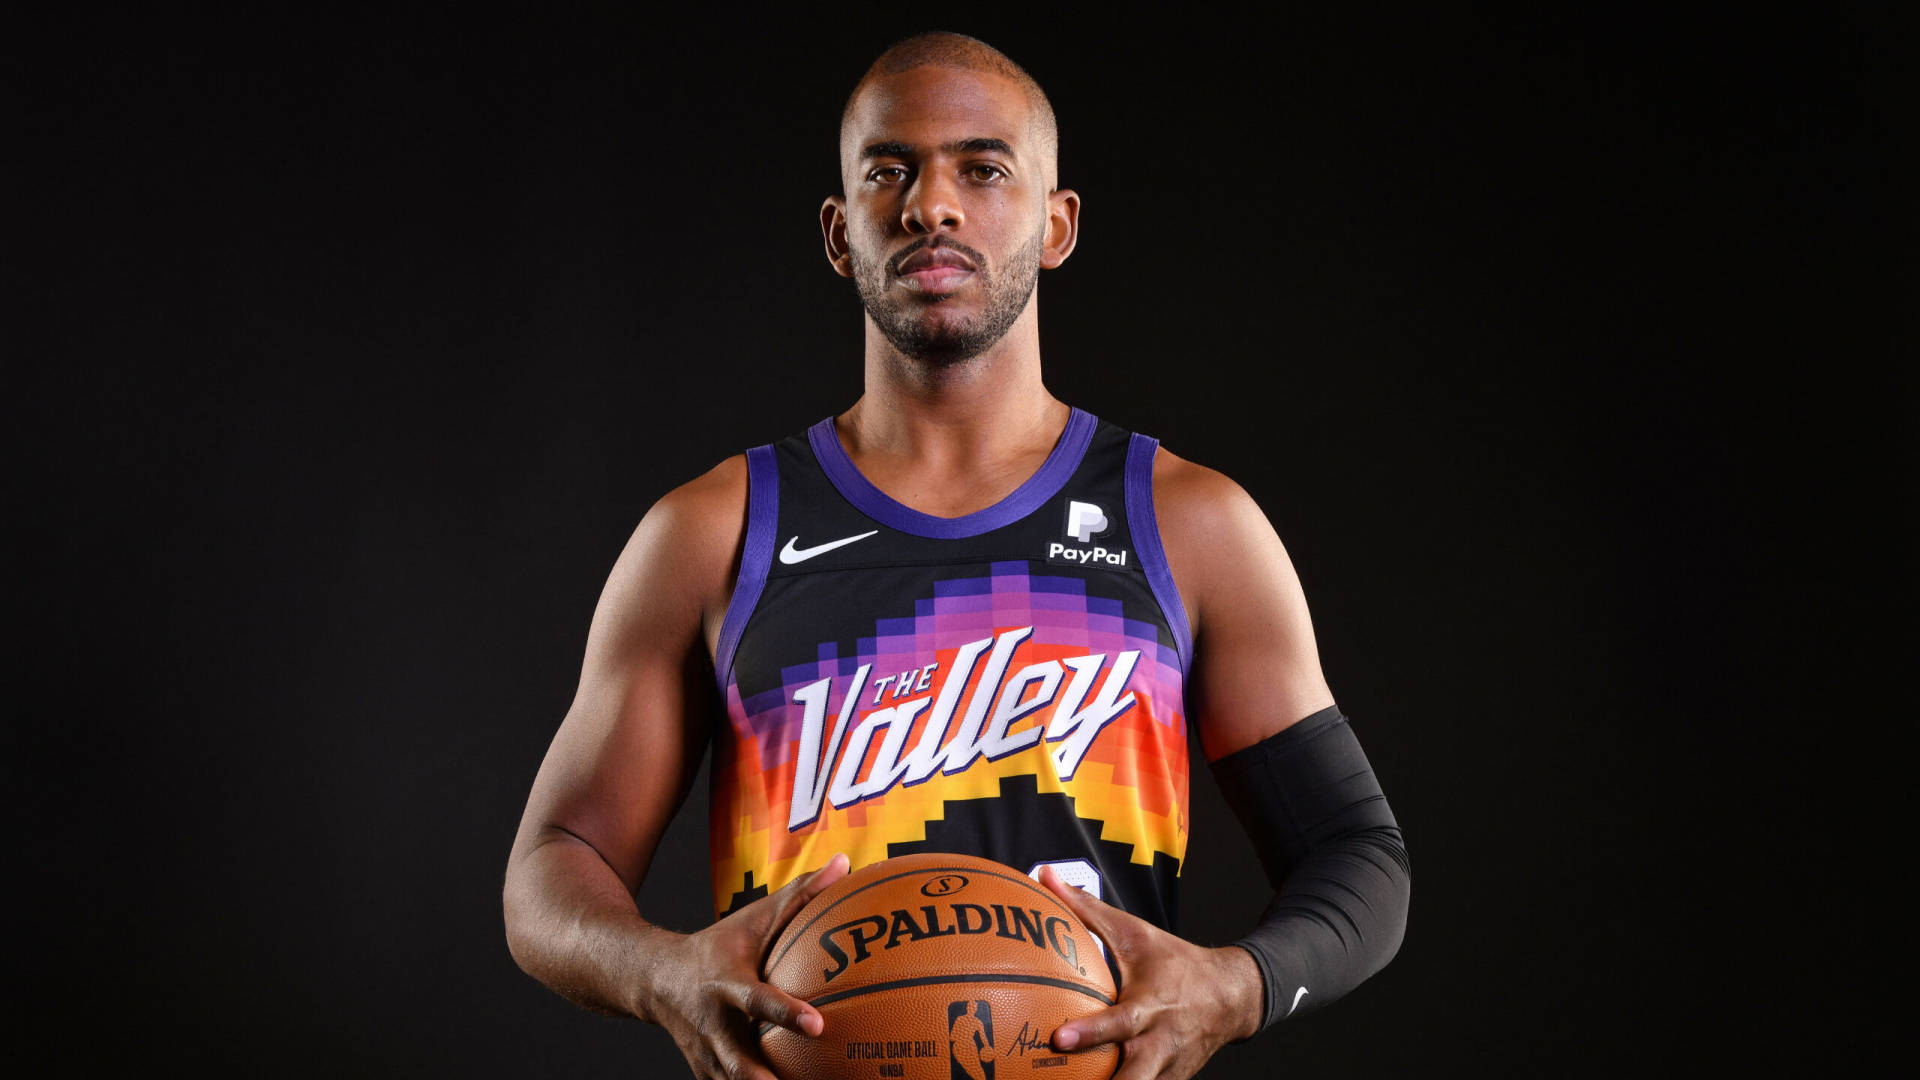 Chris Paul The Valley Jersey Background